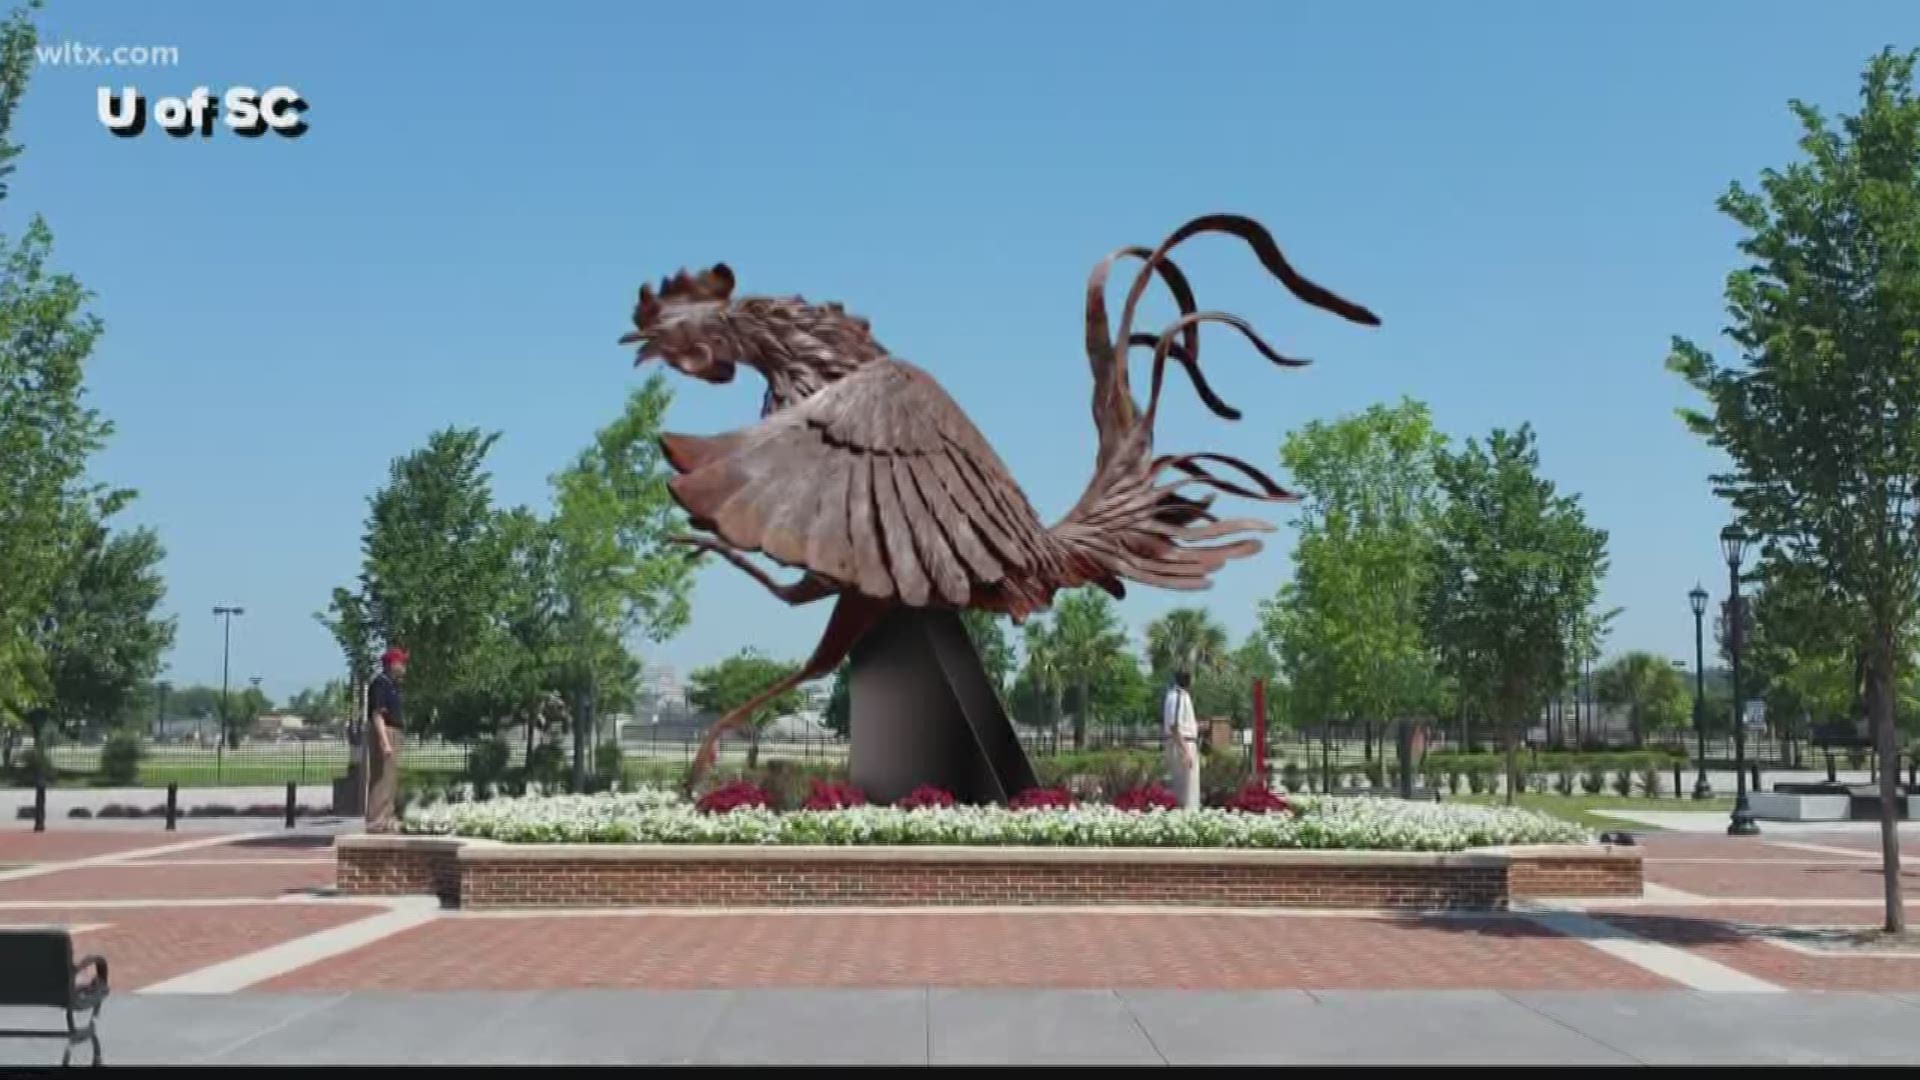 The University of South Carolina moved a few steps closer to getting an A'ja Wilson statue and a giant Gamecock statue at the school.